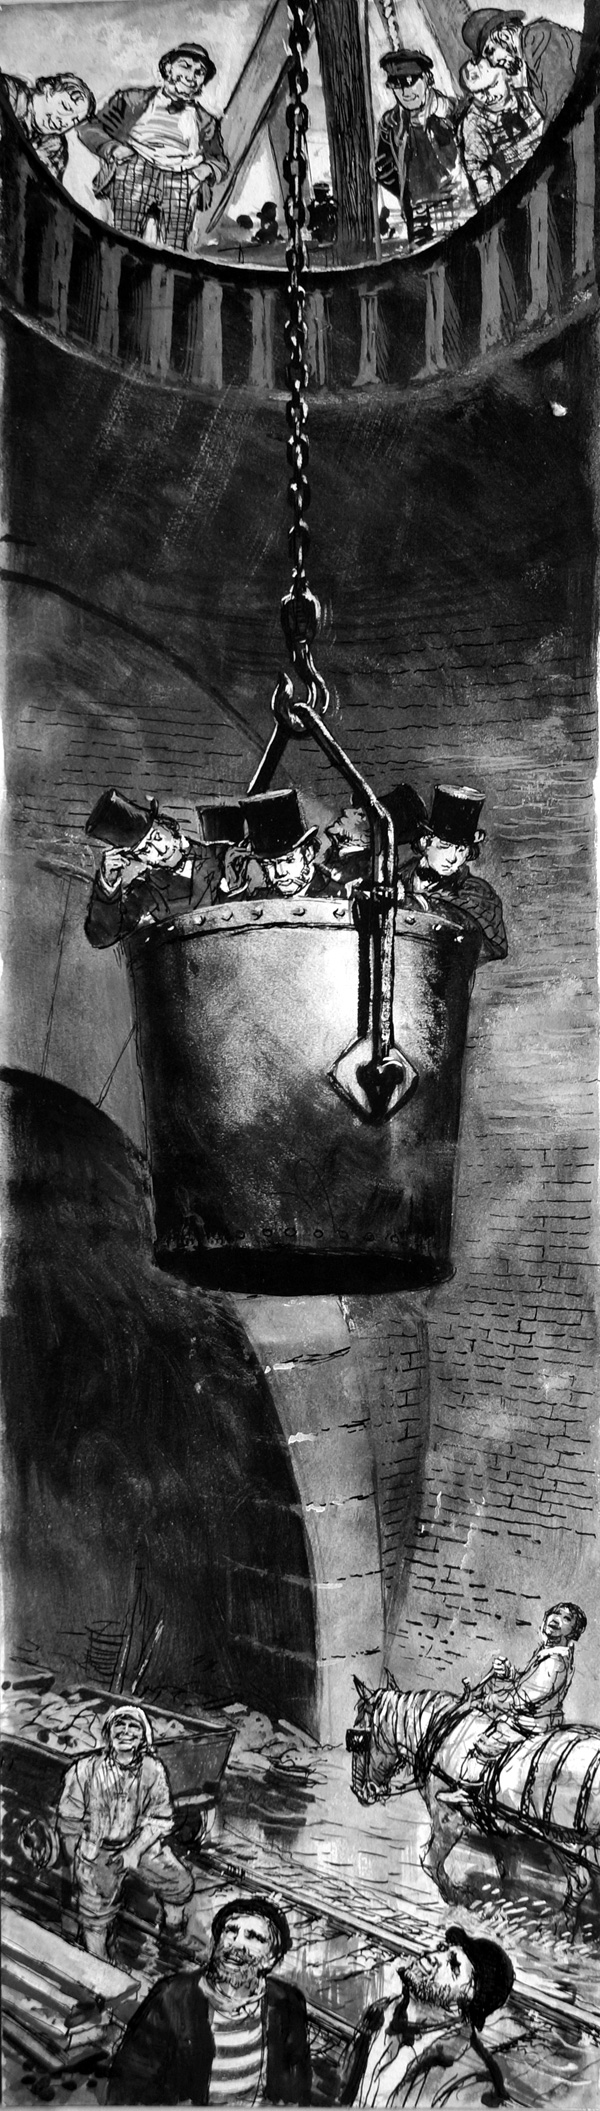 Worthies Inspecting a Tunnel Navigation (Original) by Ken Petts at The Illustration Art Gallery